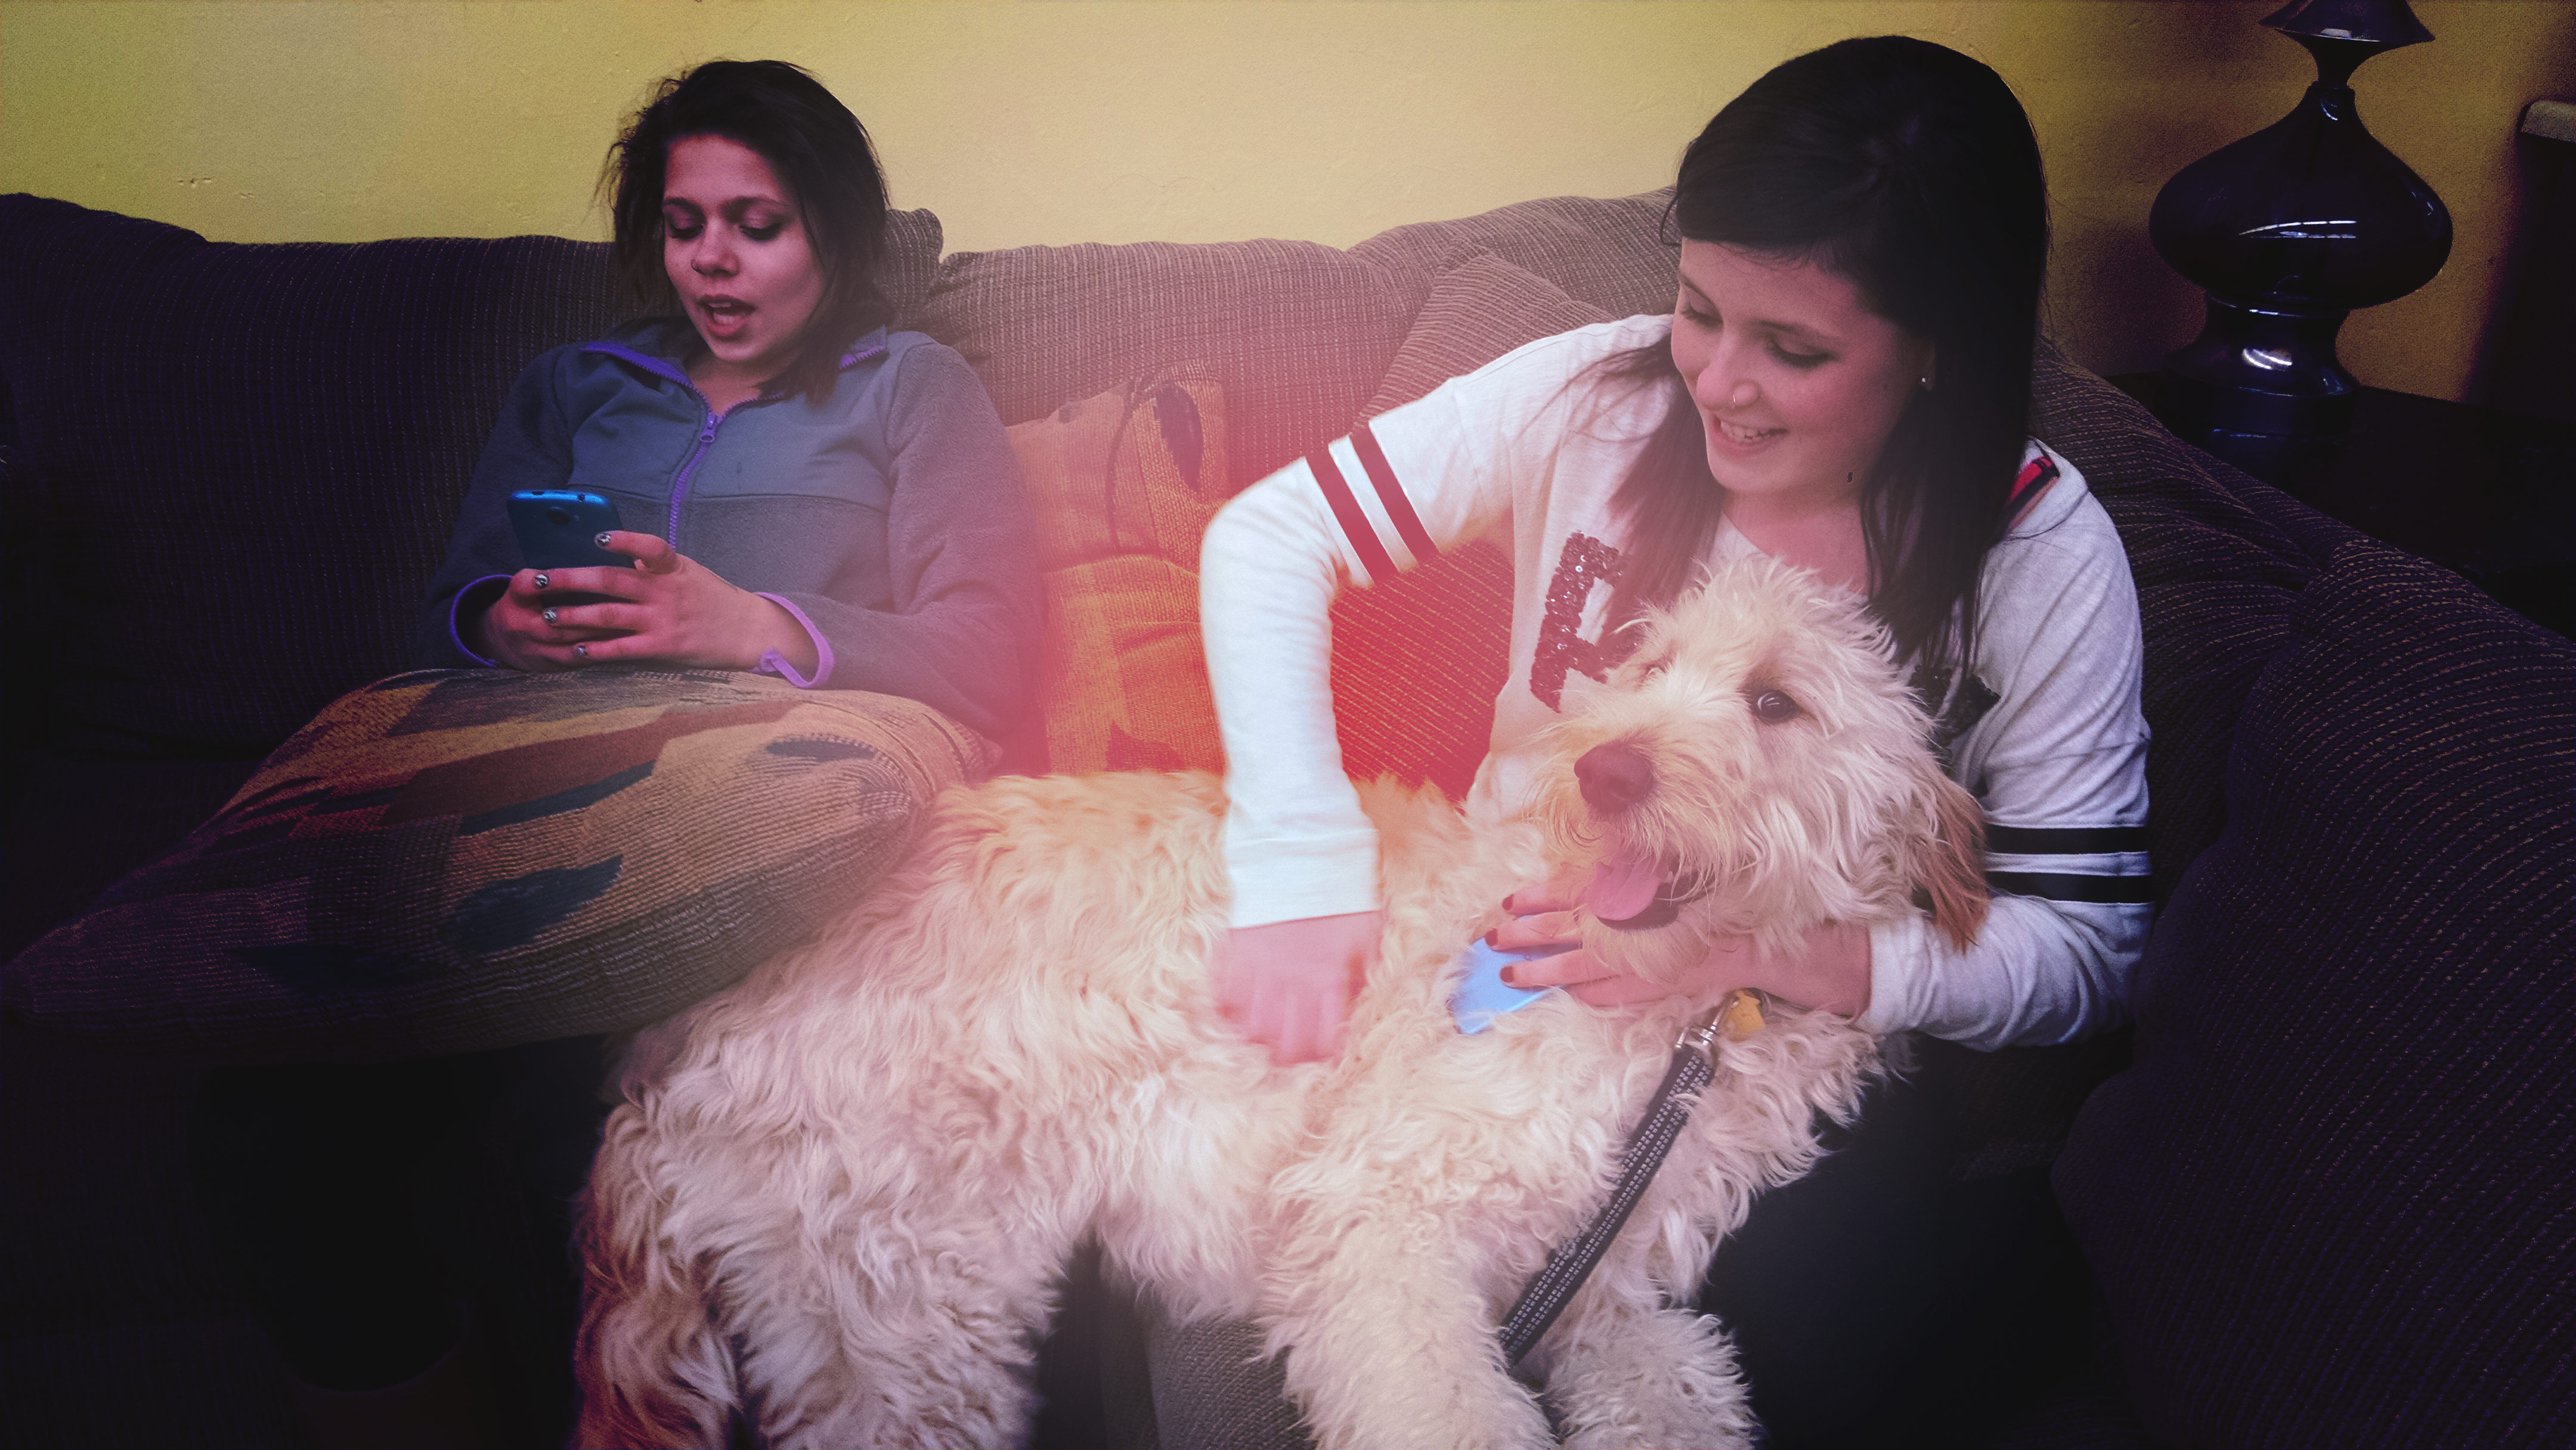 Girls On Couch With Dog